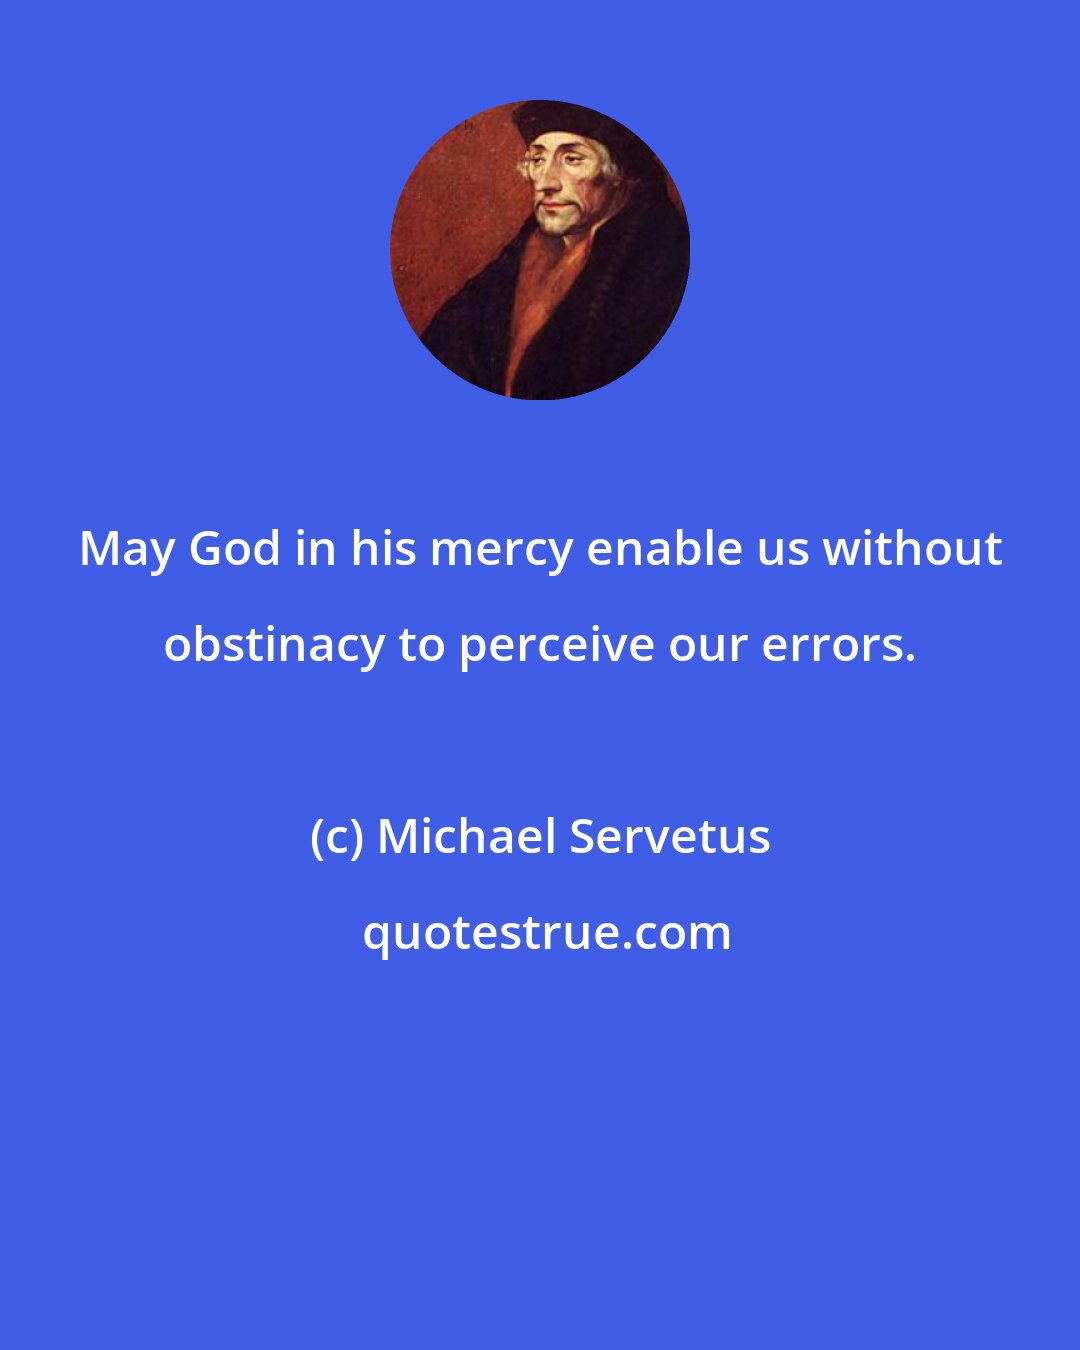 Michael Servetus: May God in his mercy enable us without obstinacy to perceive our errors.